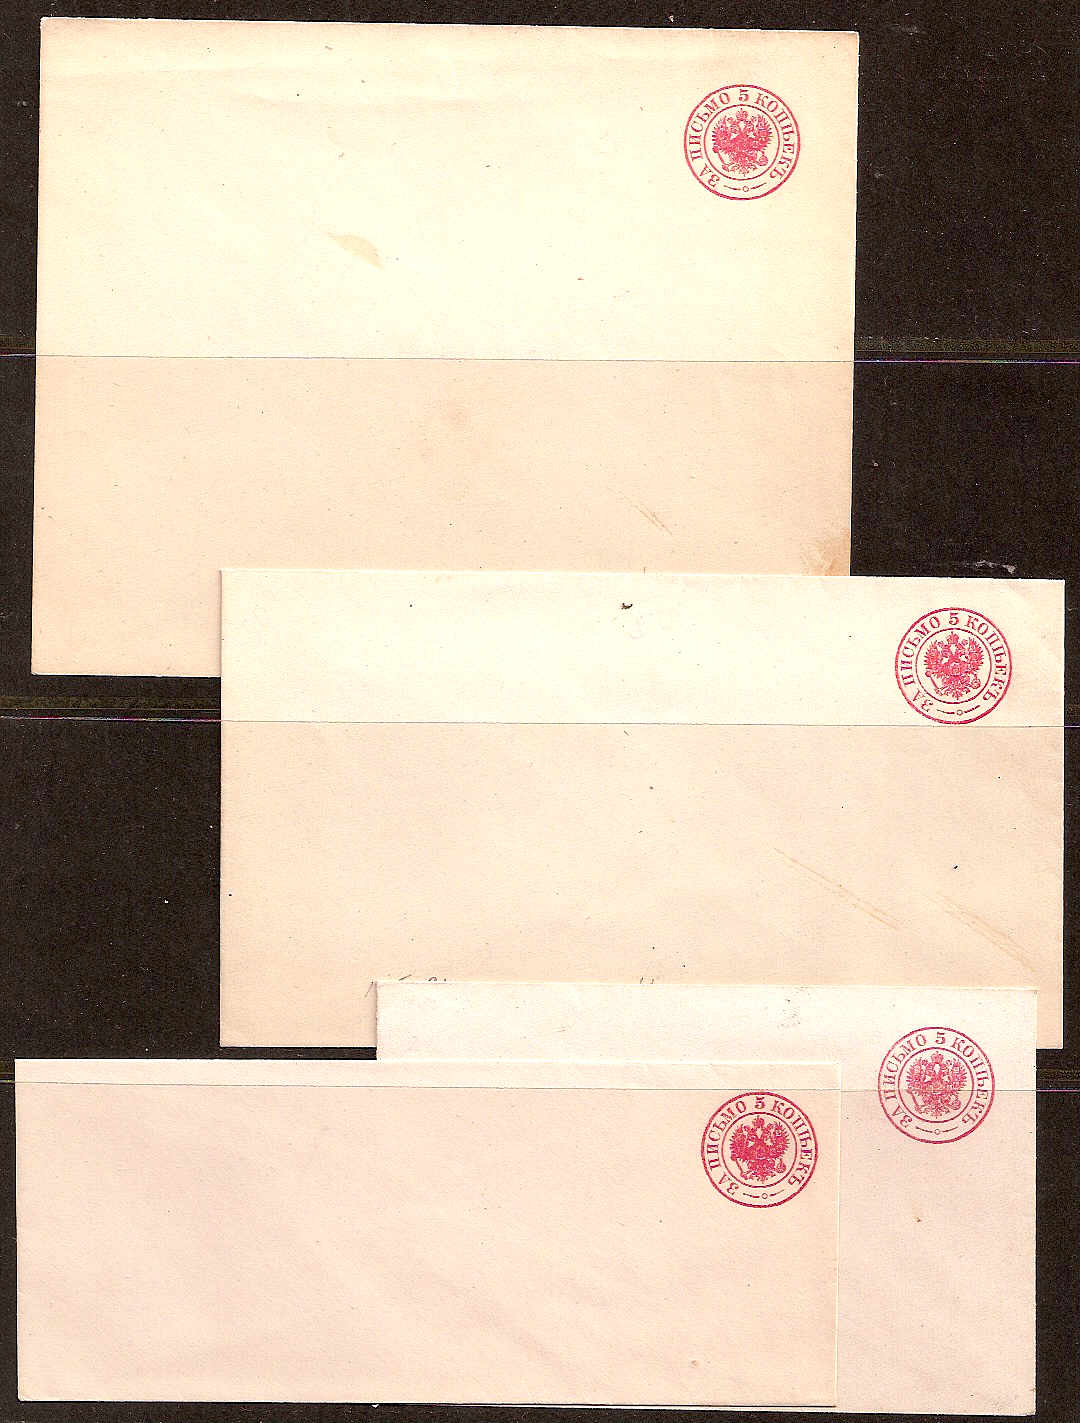 Postal Stationery - Imperial Russia 1872 issue (embossed at right) Scott 21 Michel U20A-D 